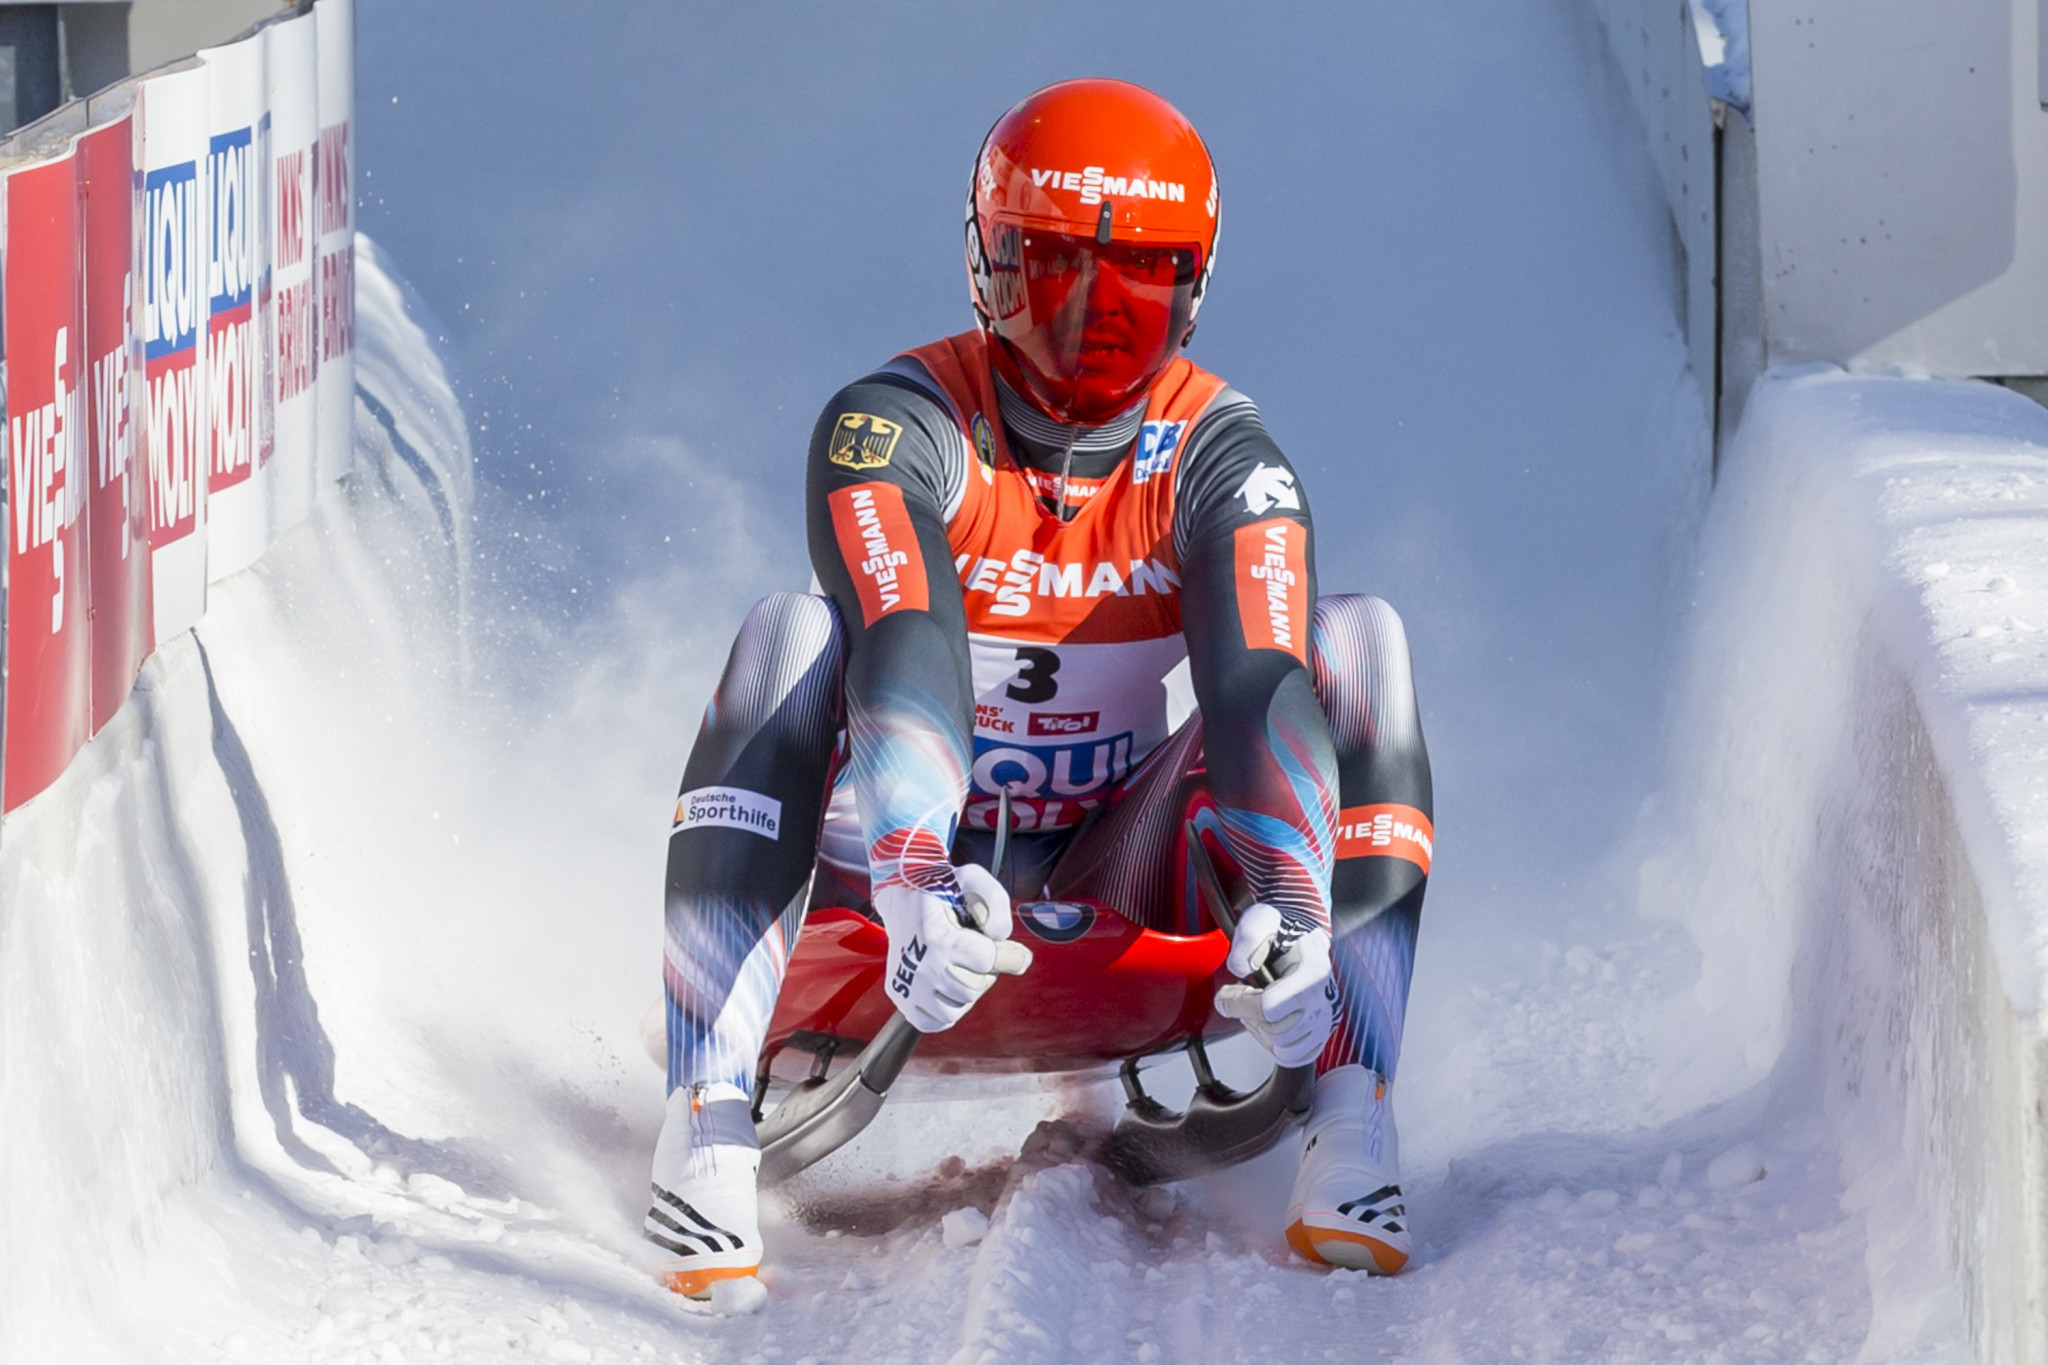 Geisenberger aiming for sixth win of FIL Luge World Cup season in Oberhof